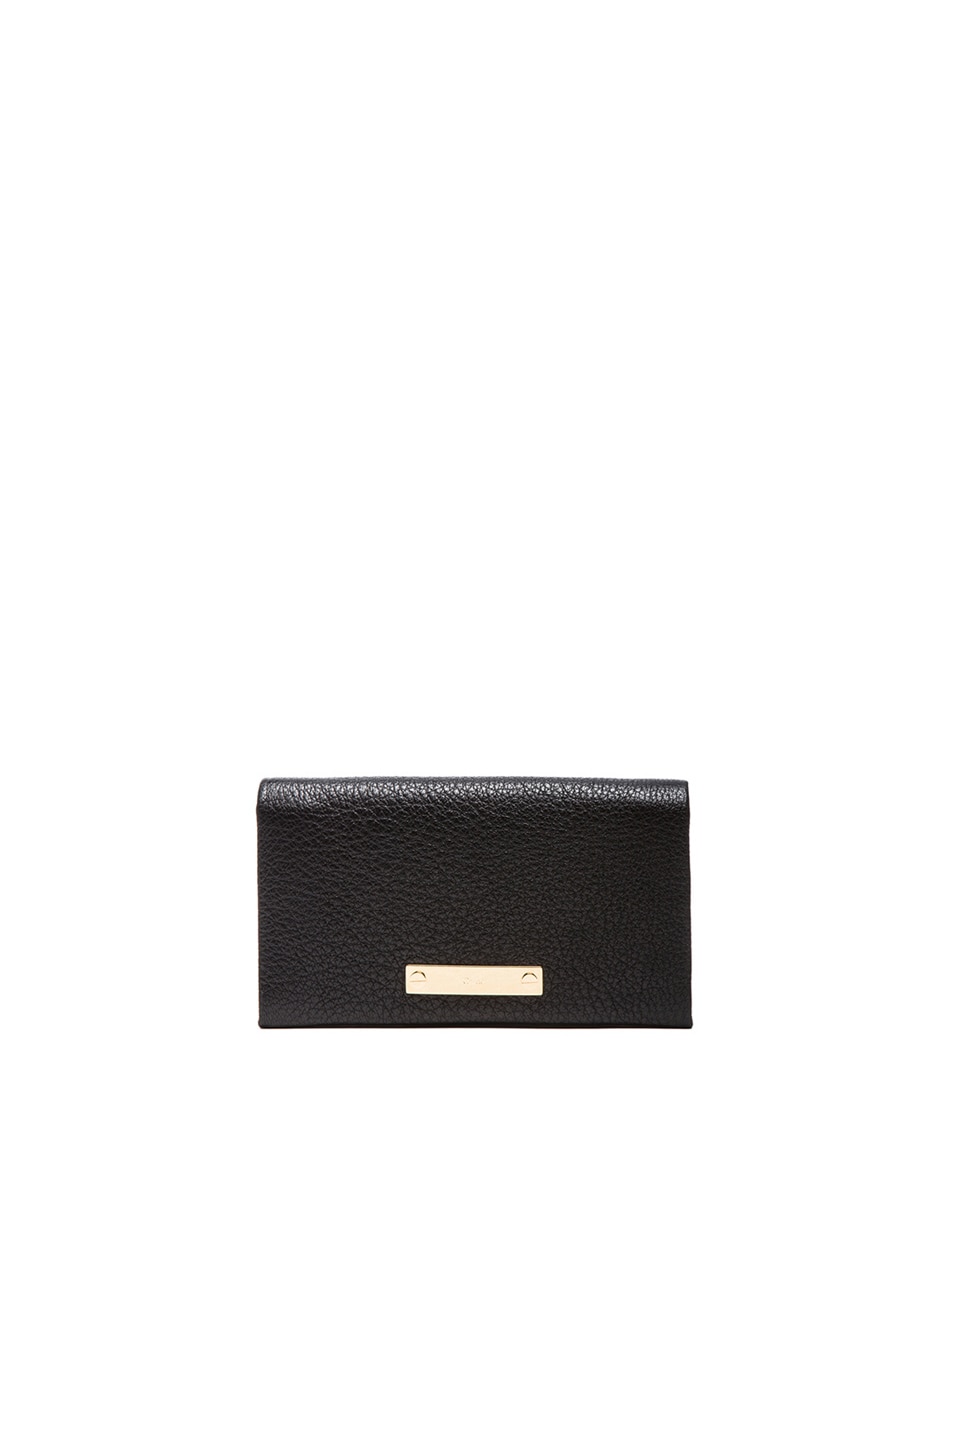 Chloe Fold Over Wallet with Pouch in Black | FWRD